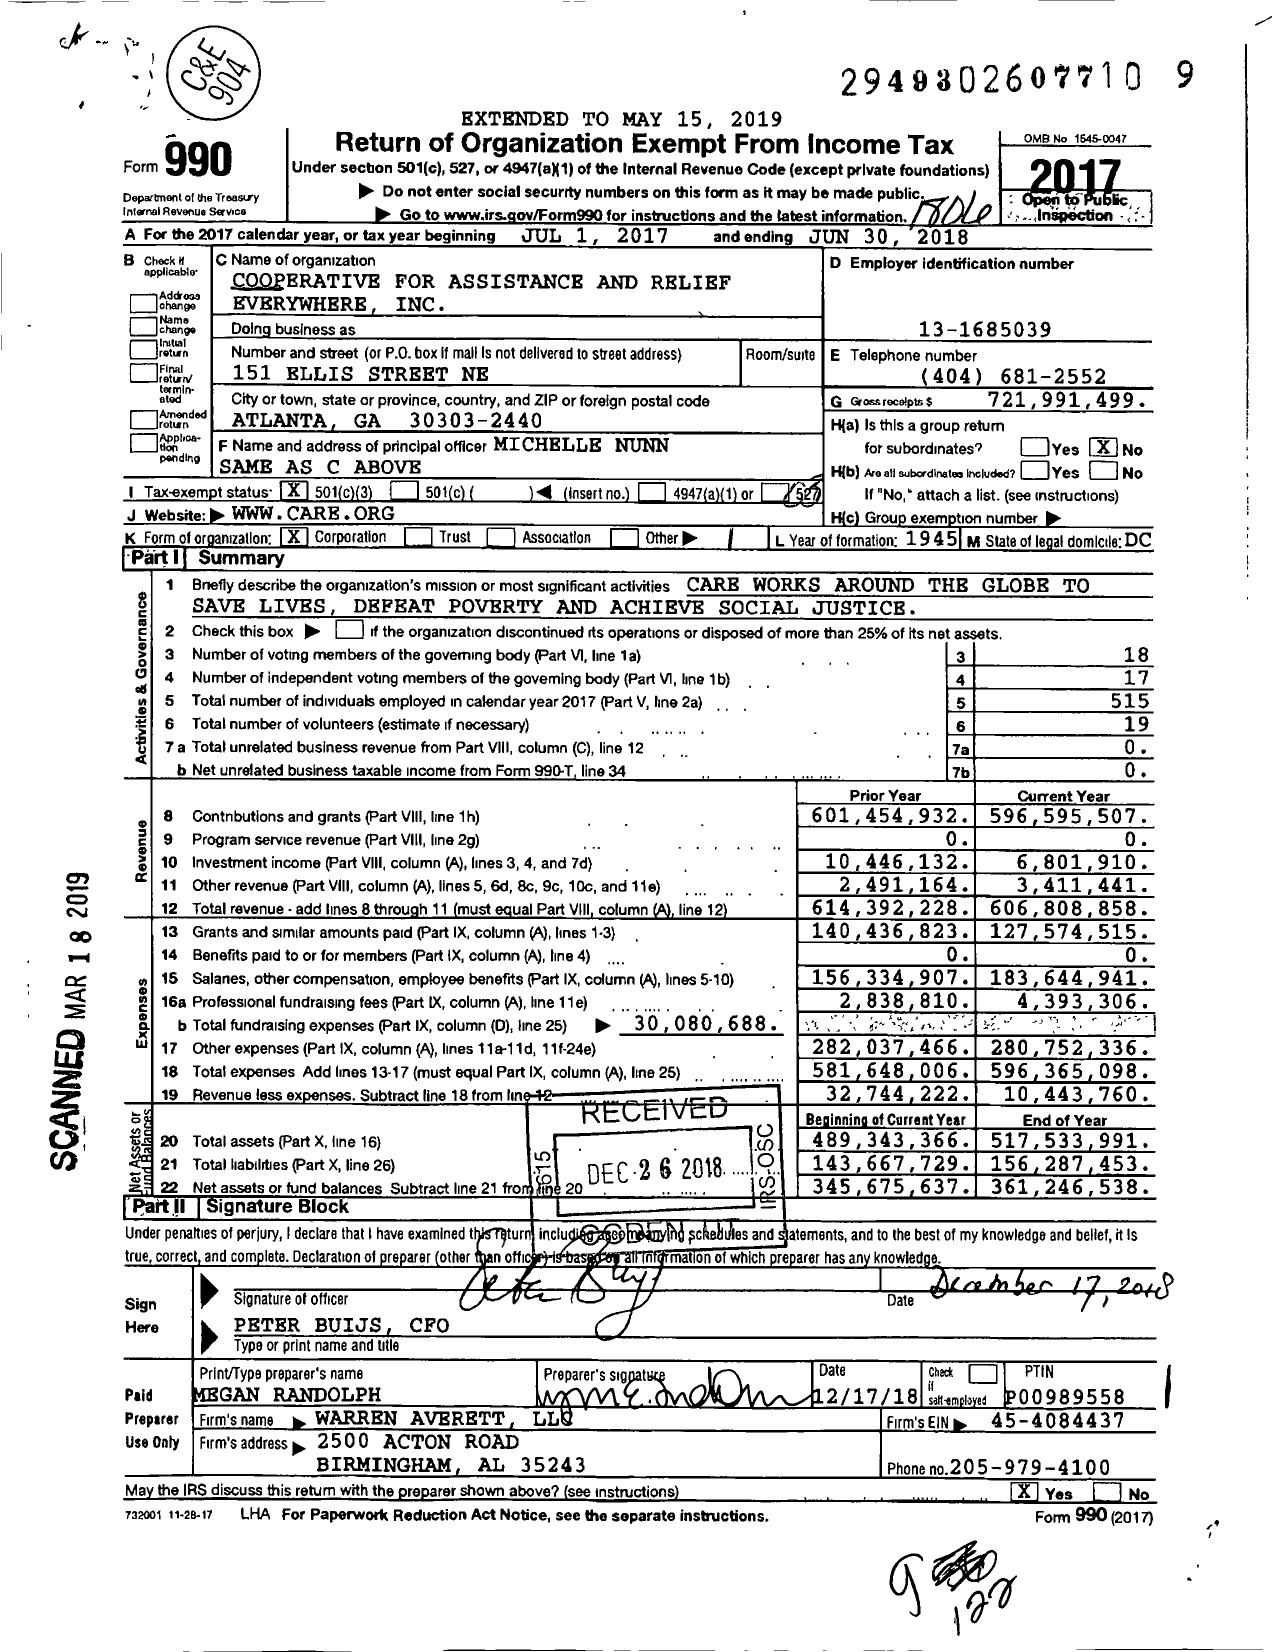 Image of first page of 2017 Form 990 for Cooperative for Assistance and Relief EVERYWHERE